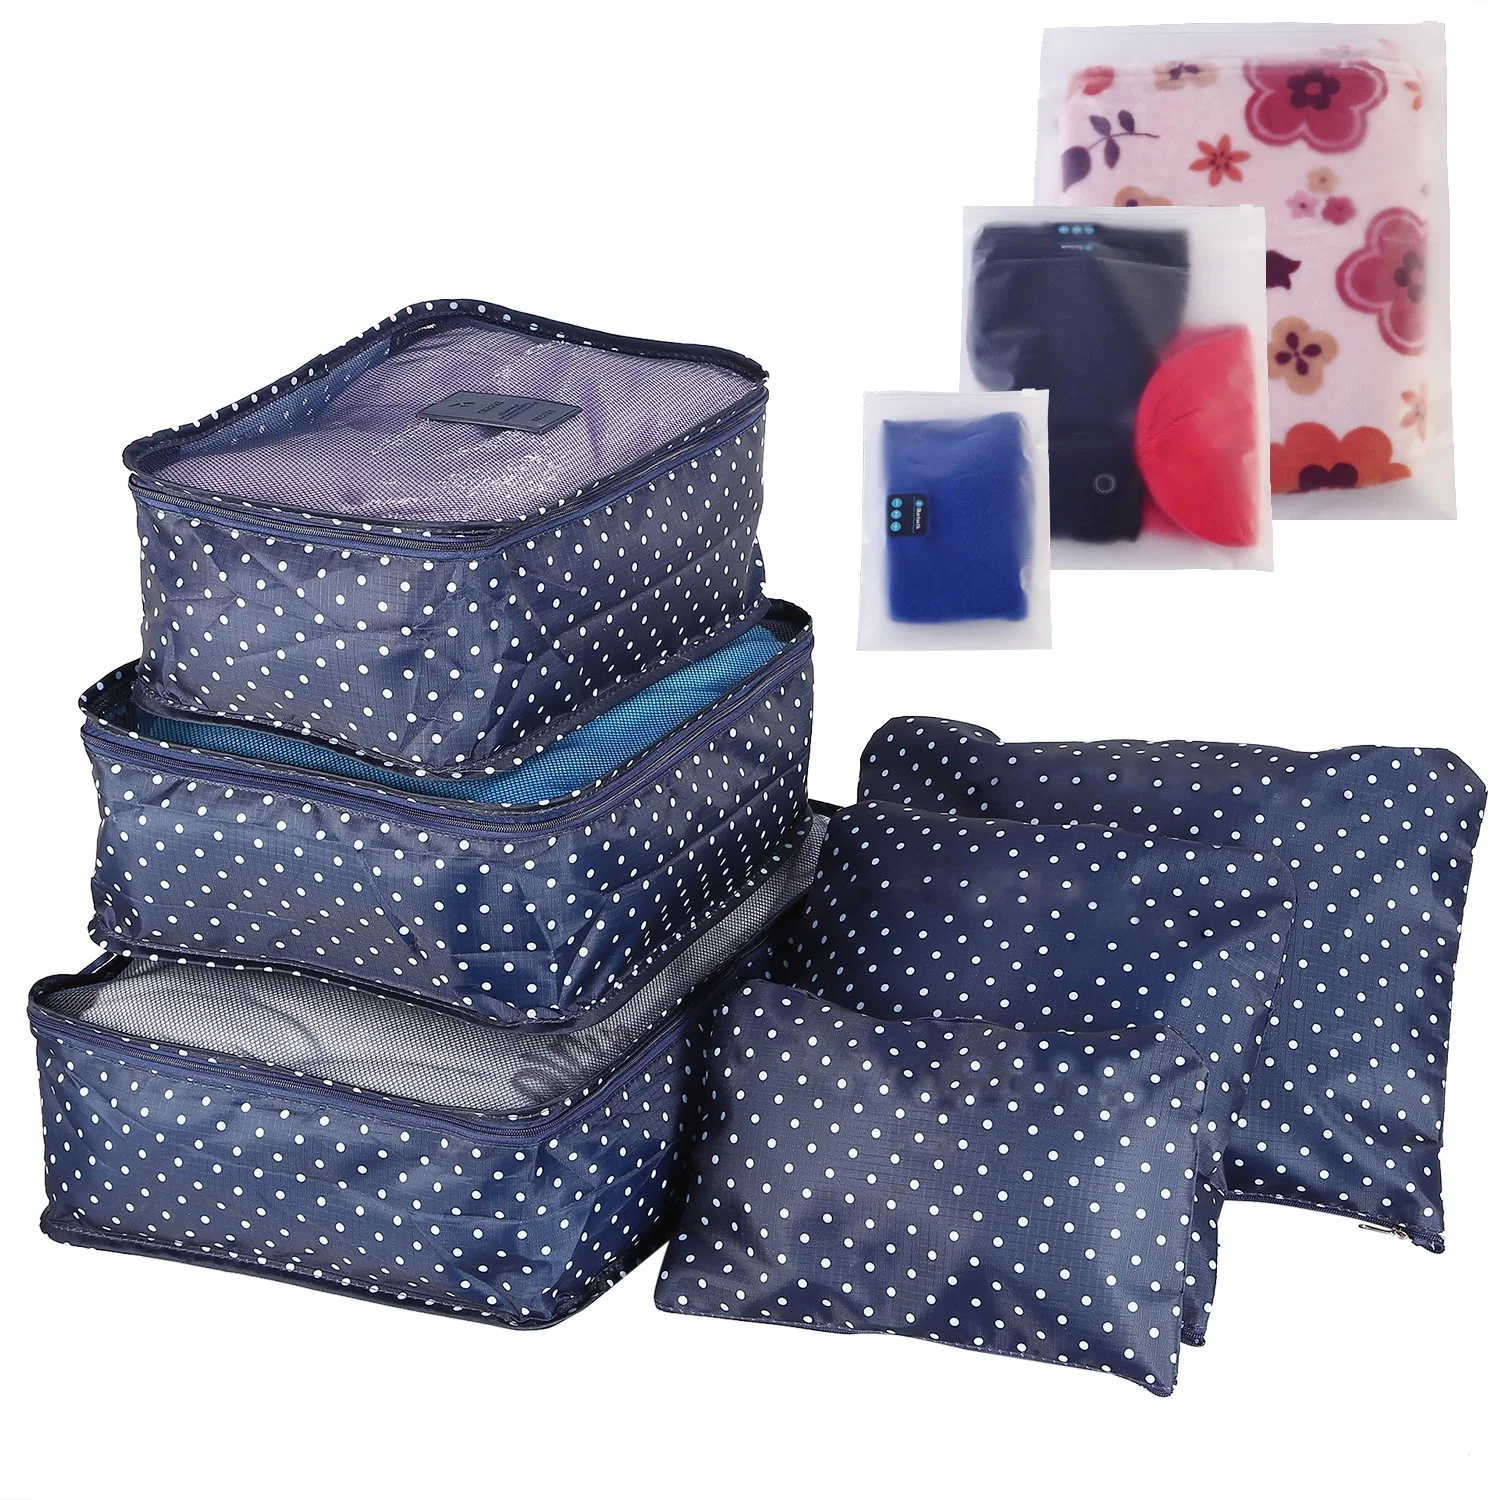 Branded 9Pcs Clothes Storage Bags Water-Resistant Travel Luggage Organizer Clothing Packing Cubes Navy Spot